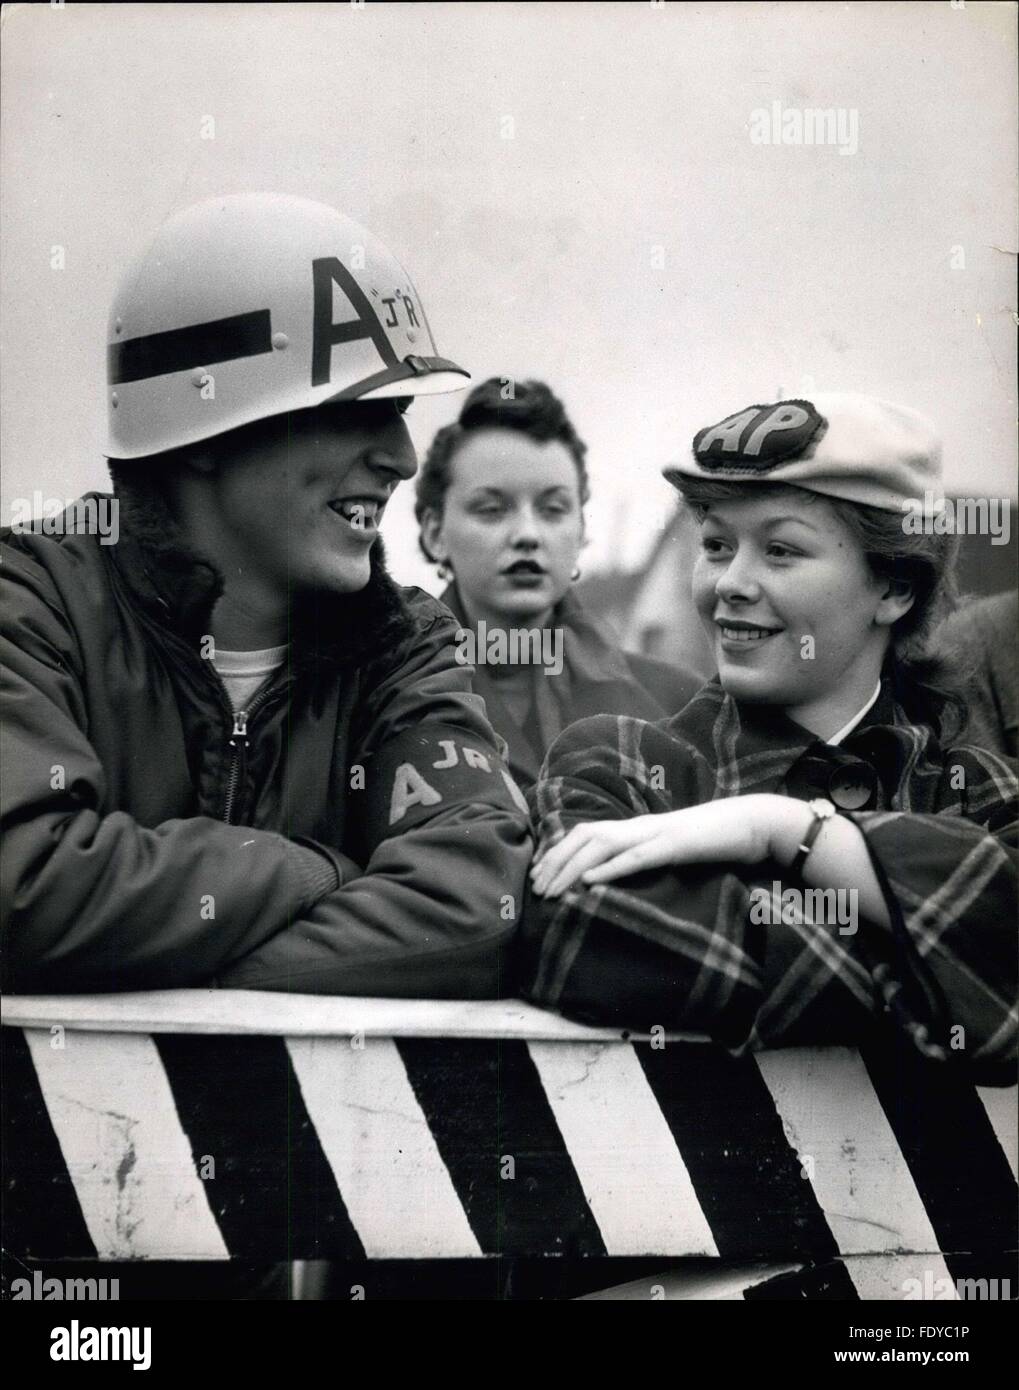 1955 - Wearing their distinctive white hats and their armbands, two members of the Air Police at Burtonwood, they are Wayne Pittman of Alexandria, Louisiana and Carol McGingan of Long Island, New York. American Children Join Air Police: The U.S. Air Force in Britain have enrolled 15 children in their Air Police. They are all under 16 and have been formed in an Air Police Squadron. Their duties include keeping discipline among their fellow pupils, giving first aid to children and enforcing road safety. The squadron is stationed at Burtonwood, the American airbase in Lancashire. All the boys and Stock Photo